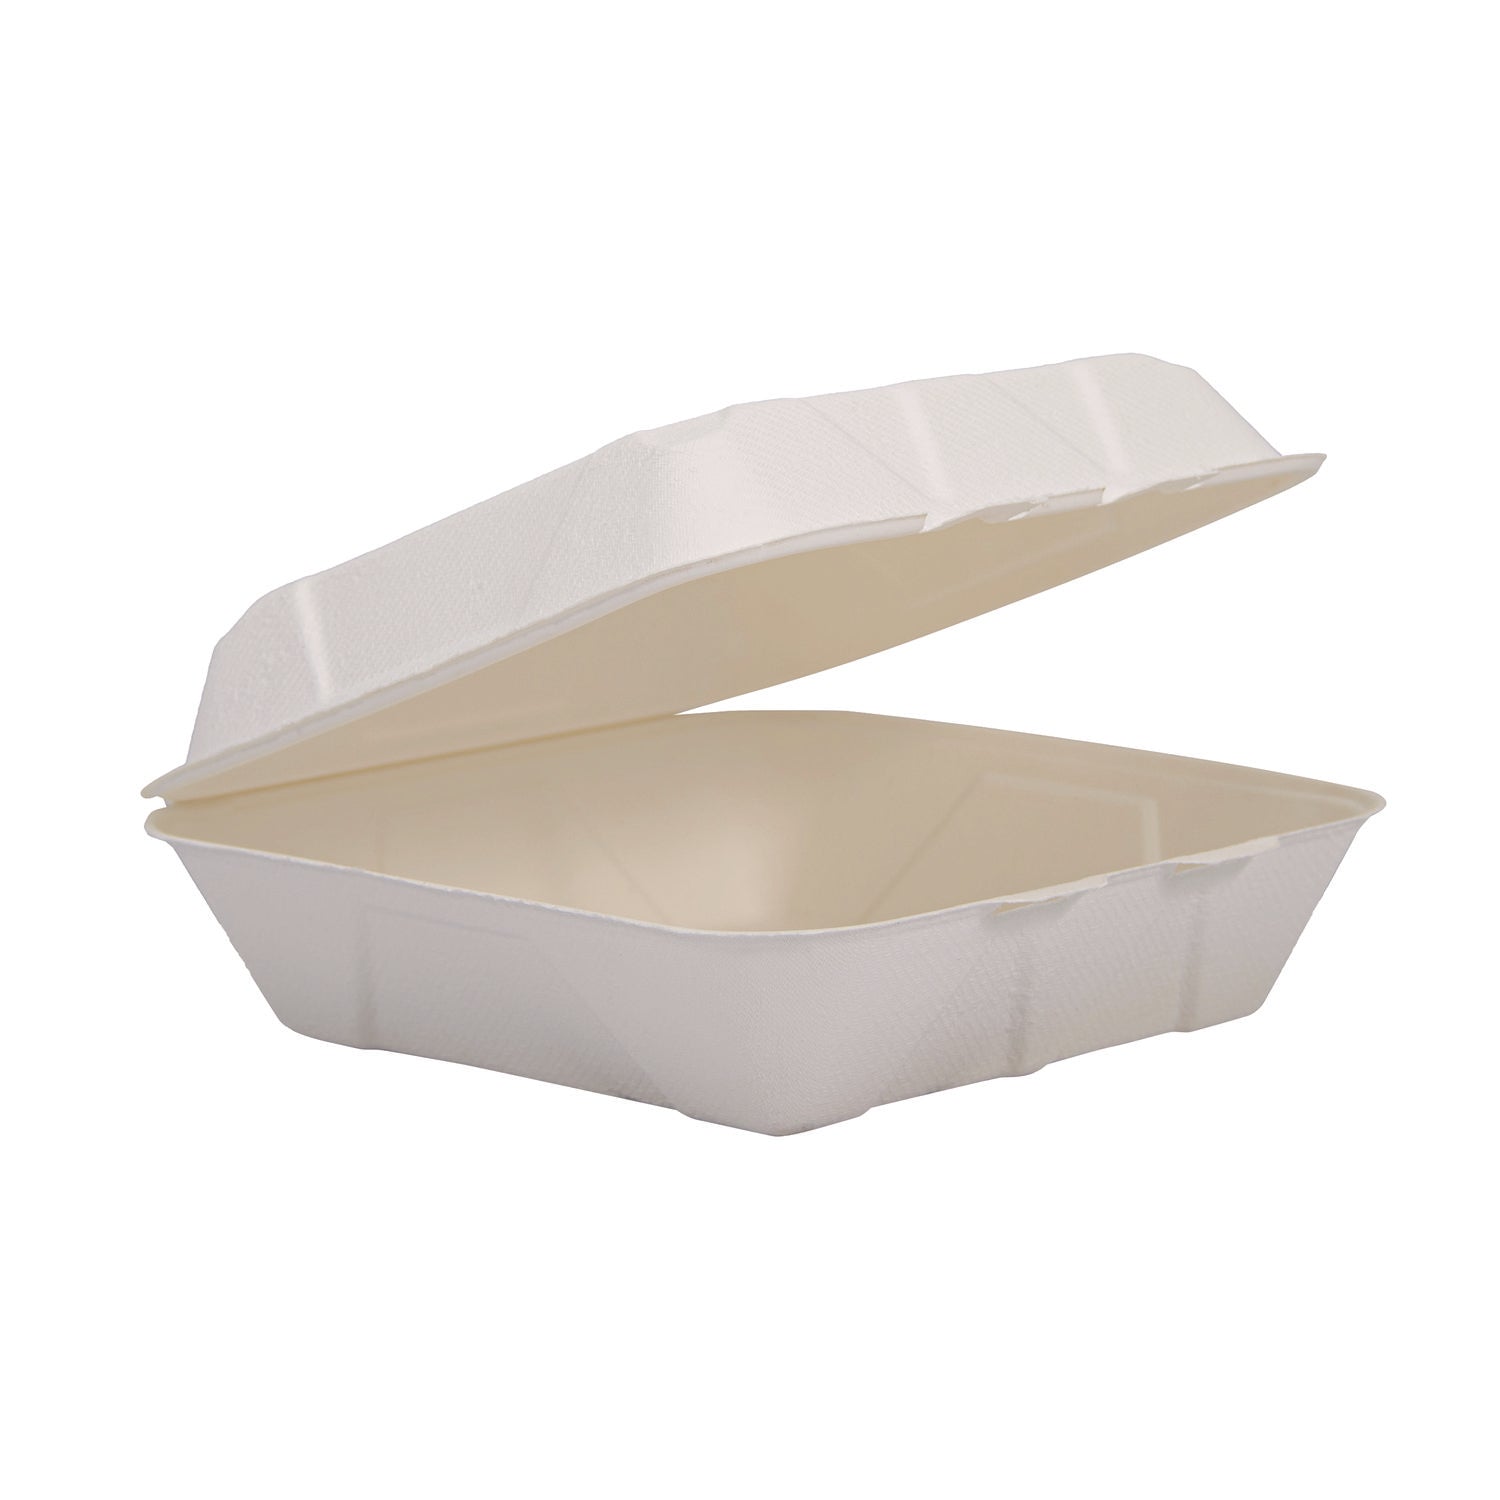 compostable-fiber-hinged-trays-proplanet-seal-898-x-935-x-217-ivory-molded-fiber-200-carton_dcchc9fbr1 - 1